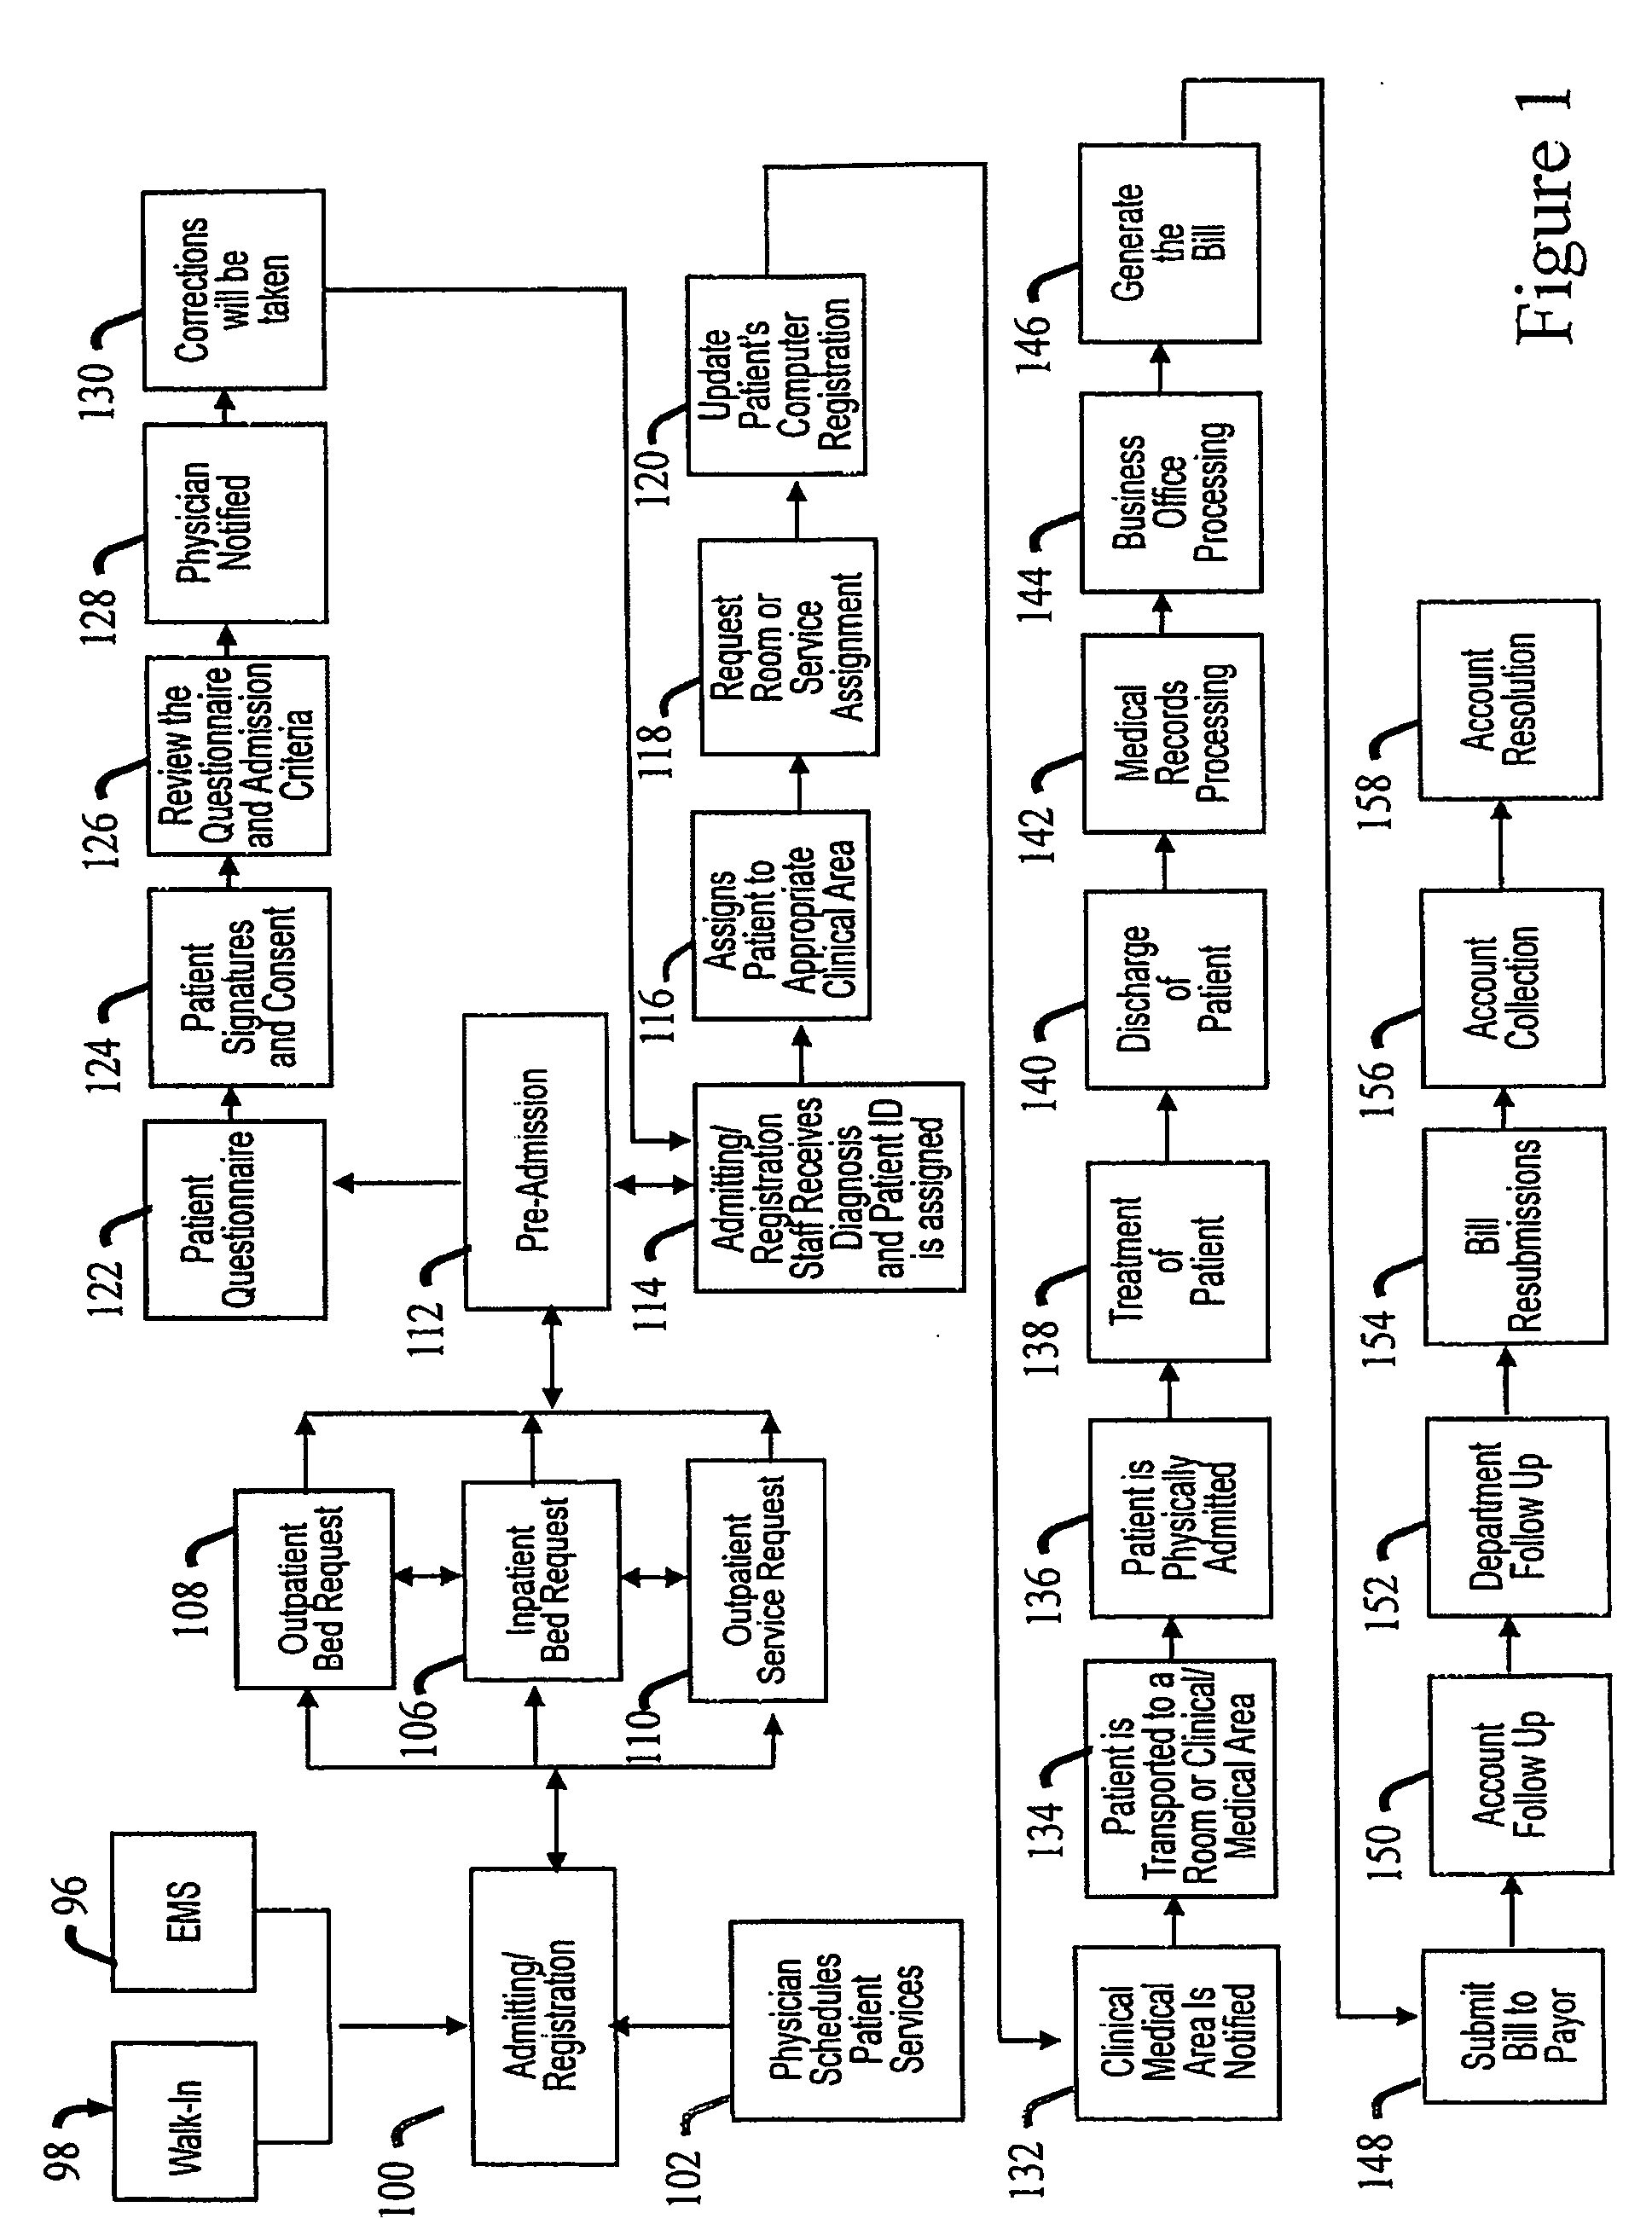 System and a method for an audit and virtual case management of a business and/or its components